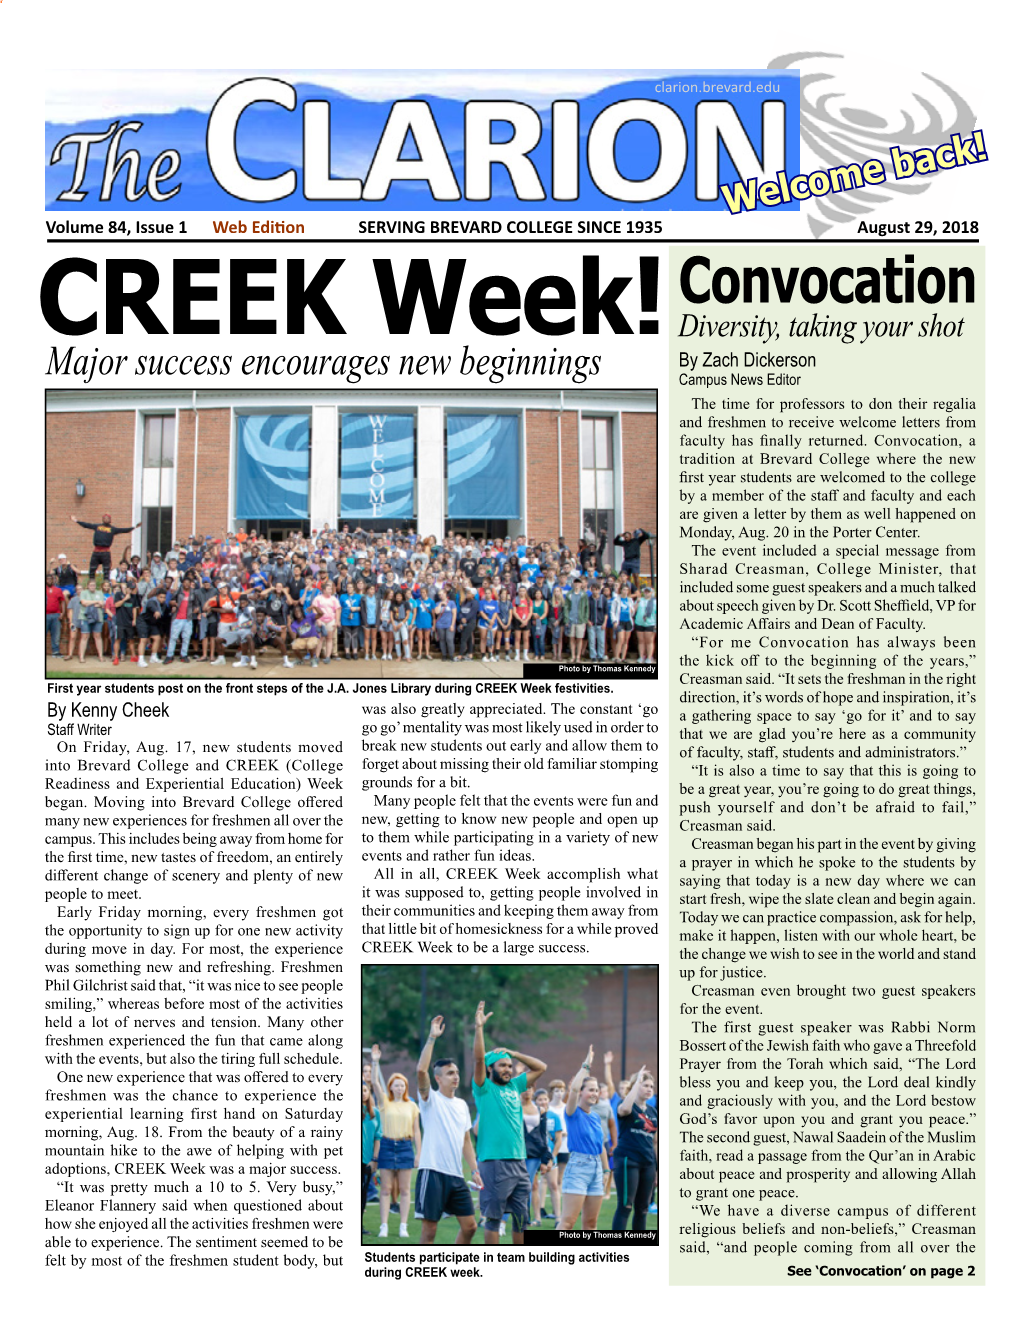 The Clarion, Vol. 84, Issue #1, Aug. 29, 2018